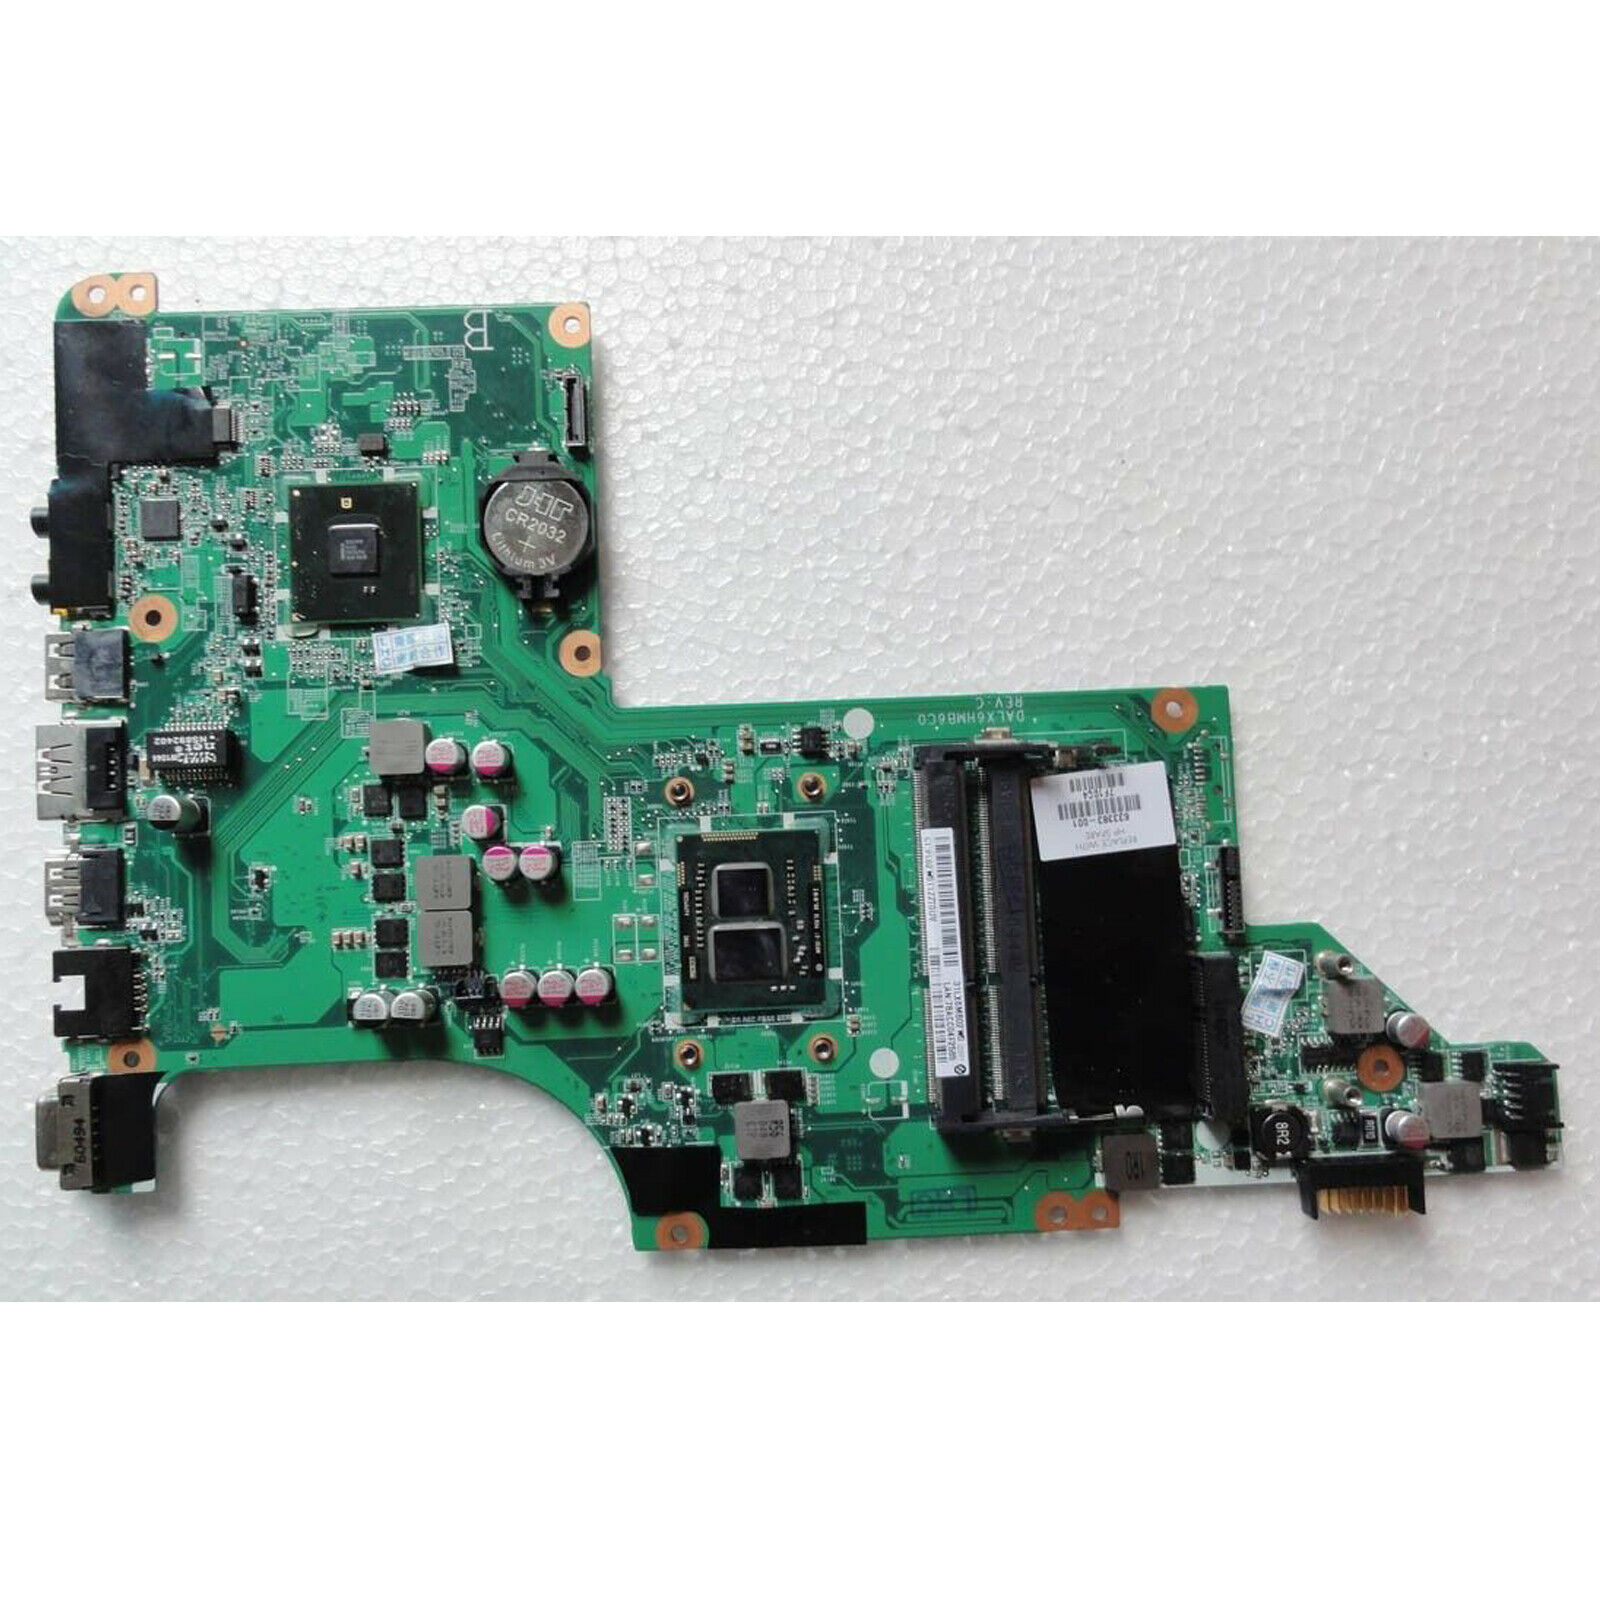 633383-001 Motherboard for HP DV6 DV6-3000 laptop, Integrated I3-350M cpu, A Brand: HP Input/Output Ports: